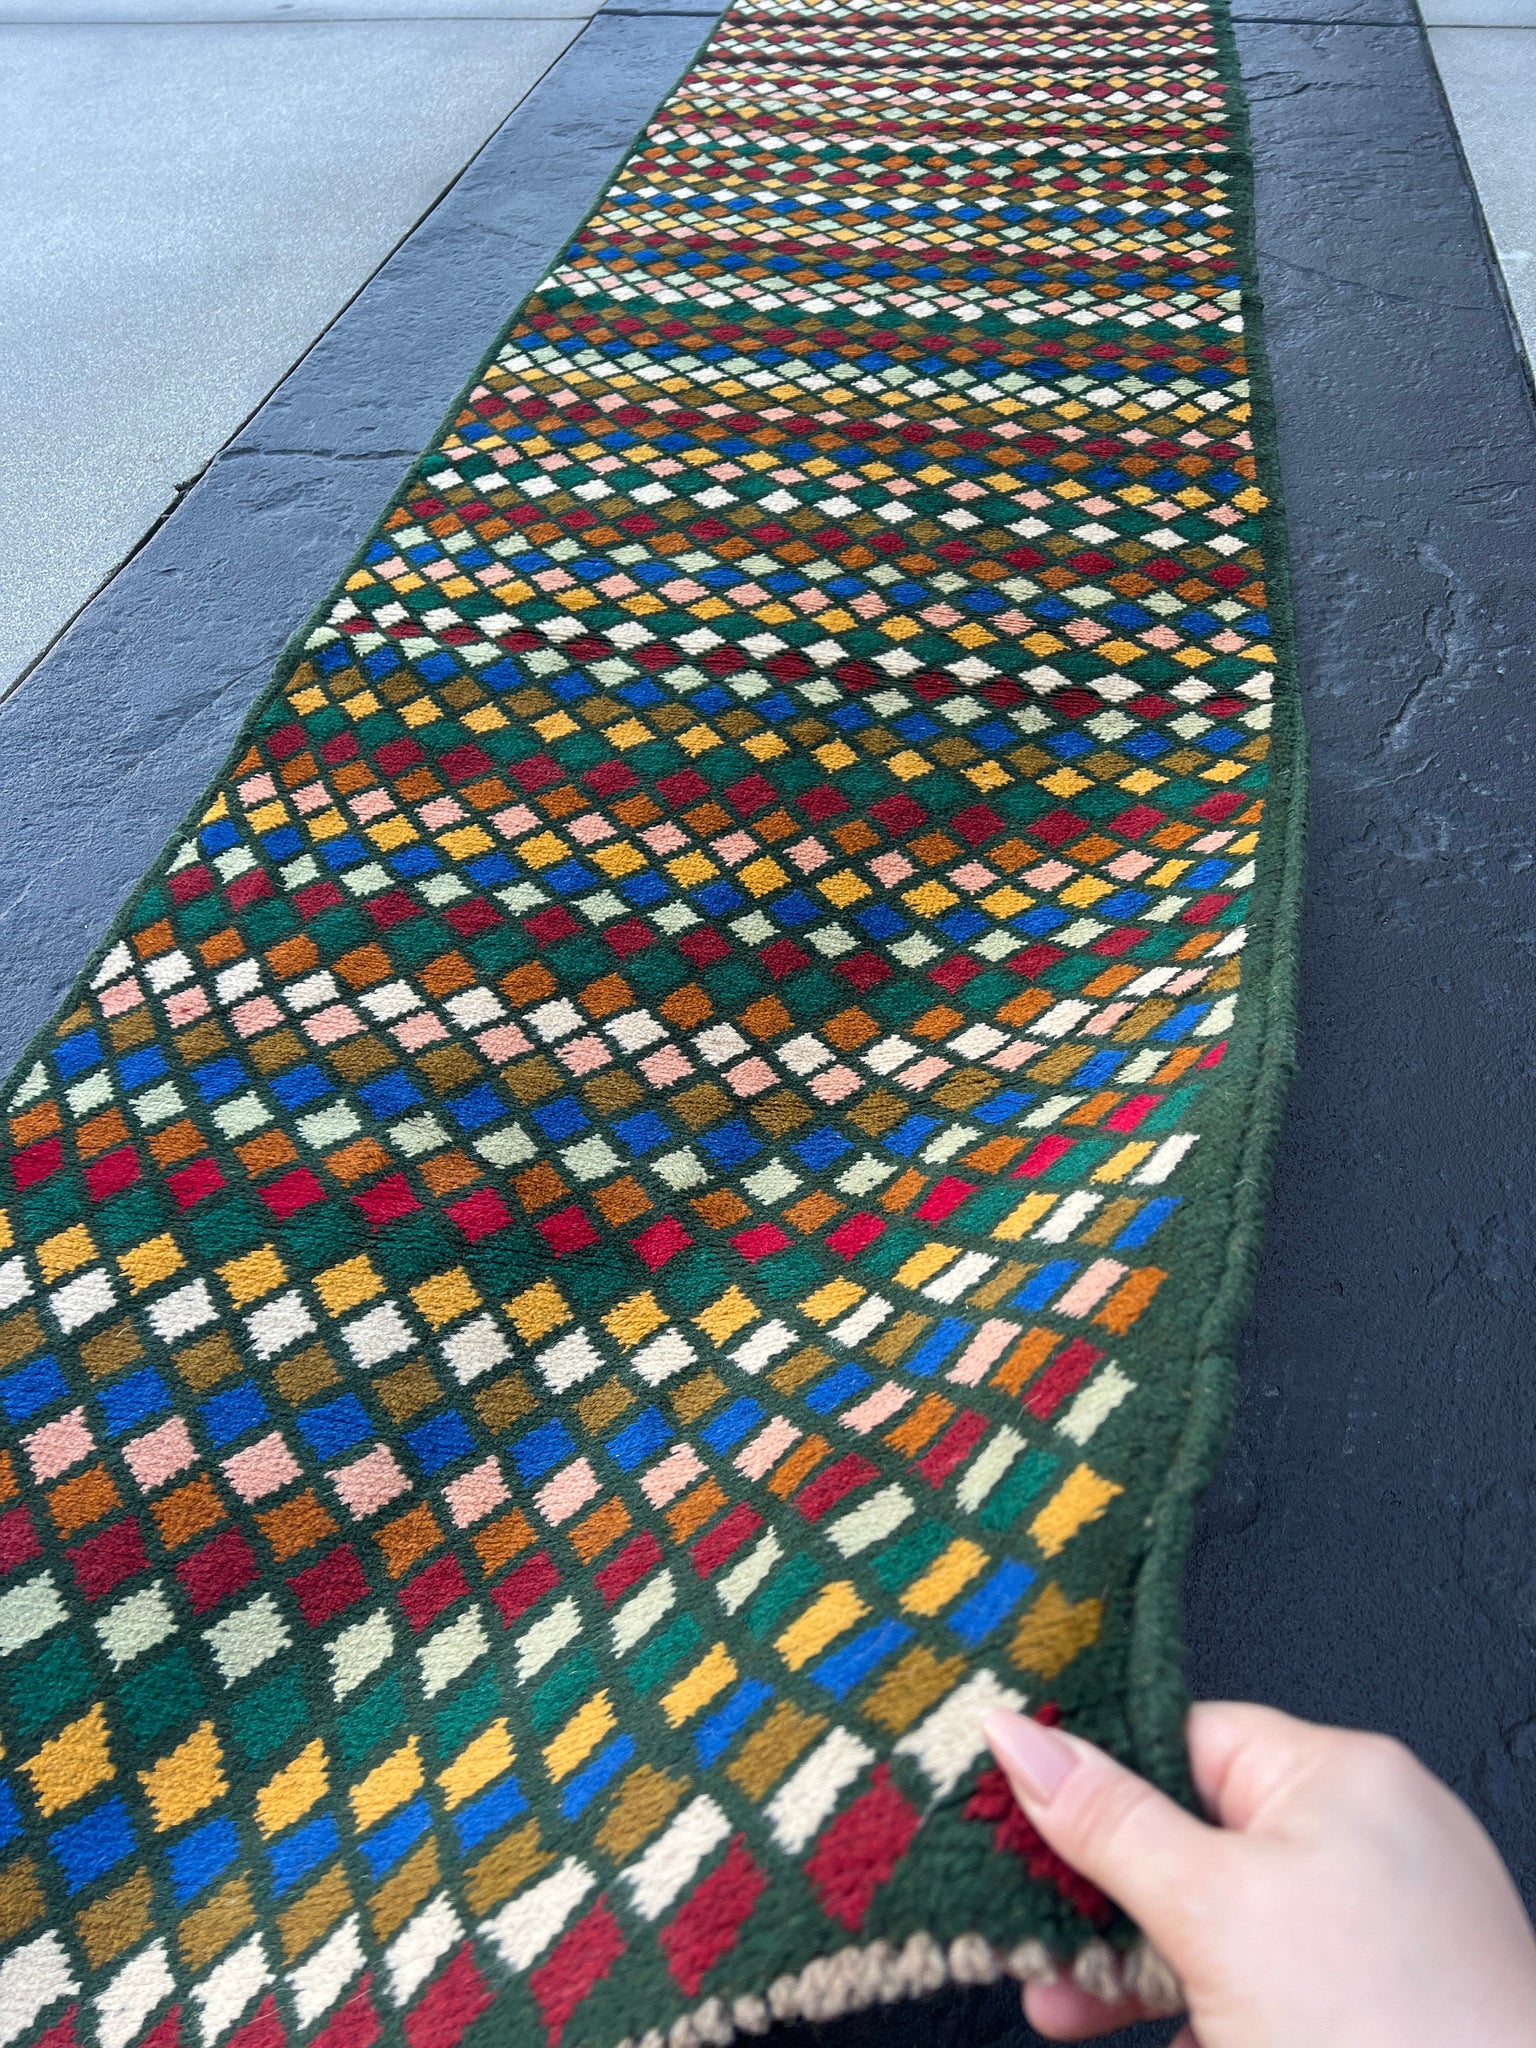 3x9 (90x275) Handmade Vintage Baluch Afghan Runner Rug | Pine Green Cherry Red Pink Turquoise Ivory Moss Green Mustard Blue Copper Brown